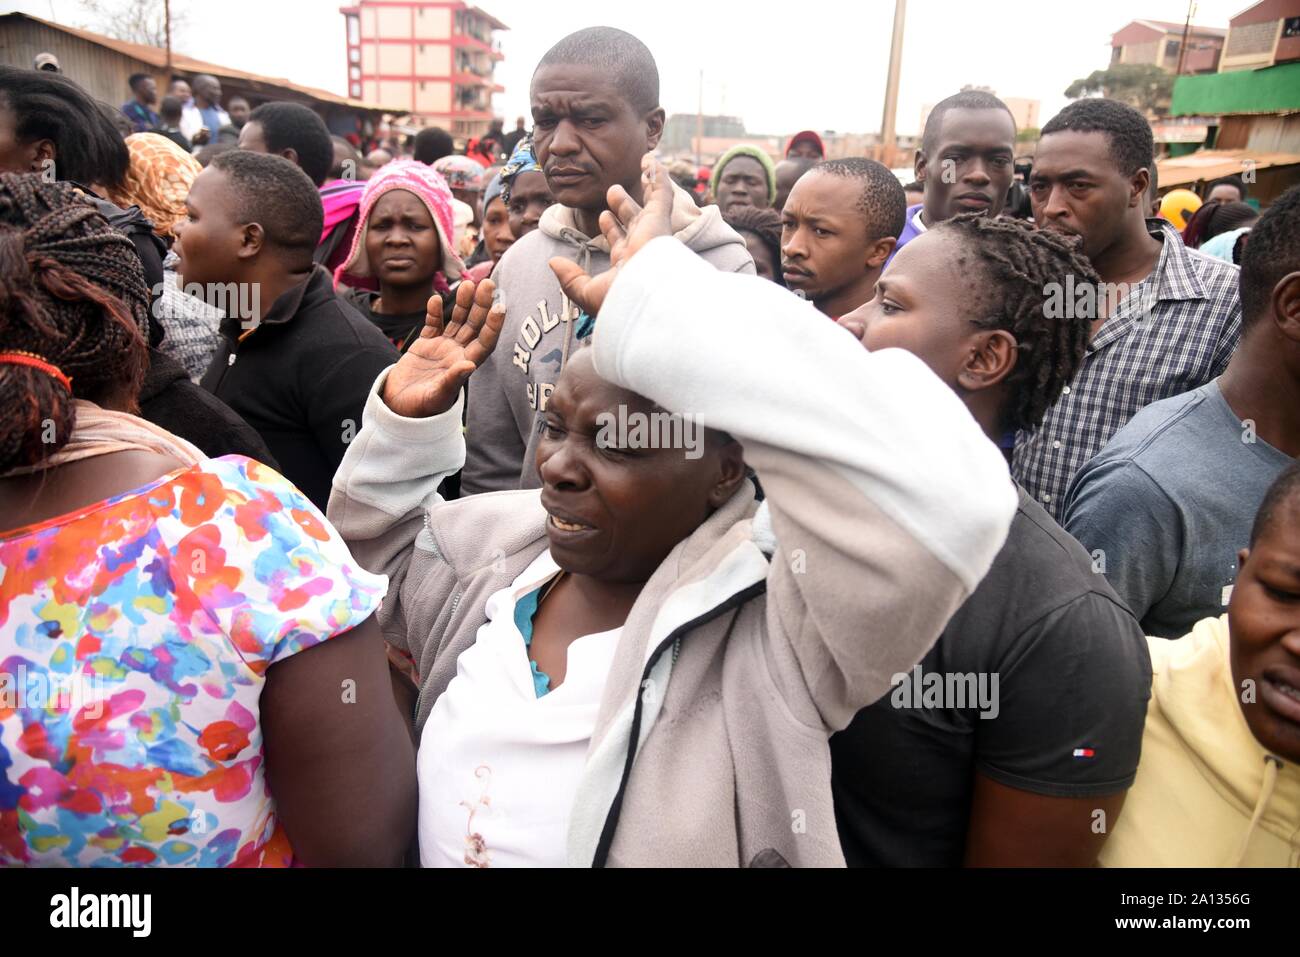 Nairobi, Kenya. 23rd Sep, 2019. People gather at the scene where a classroom collapsed in Nairobi, capital of Kenya, on Sept. 23, 2019. At least seven pupils were killed and 59 others injured early Monday after their classroom collapsed at a school compound in Nairobi, government and charity officials said. Credit: John Okoyo/Xinhua Credit: Xinhua/Alamy Live News Stock Photo